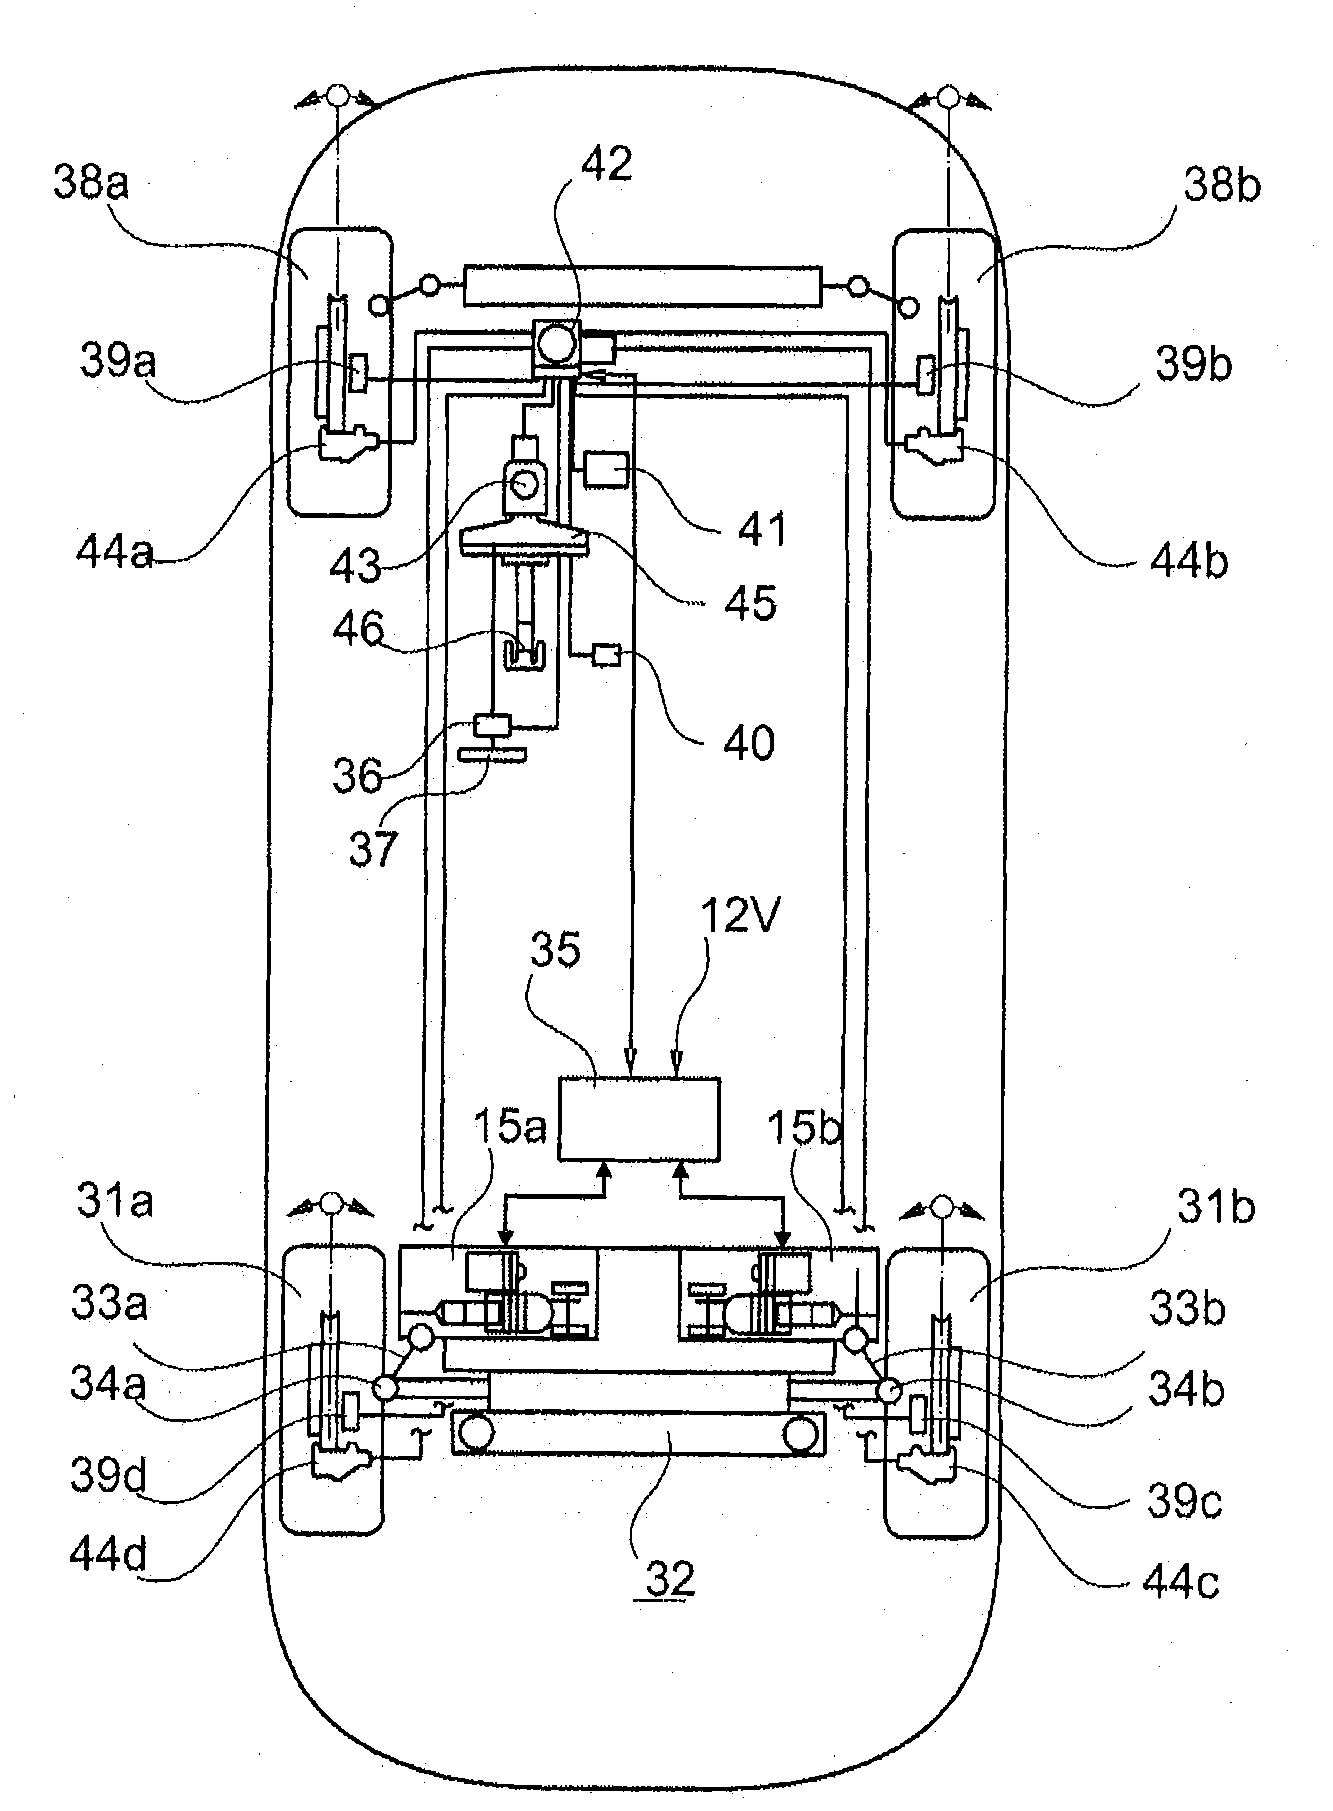 Steering device for adjusting a wheel steering angle